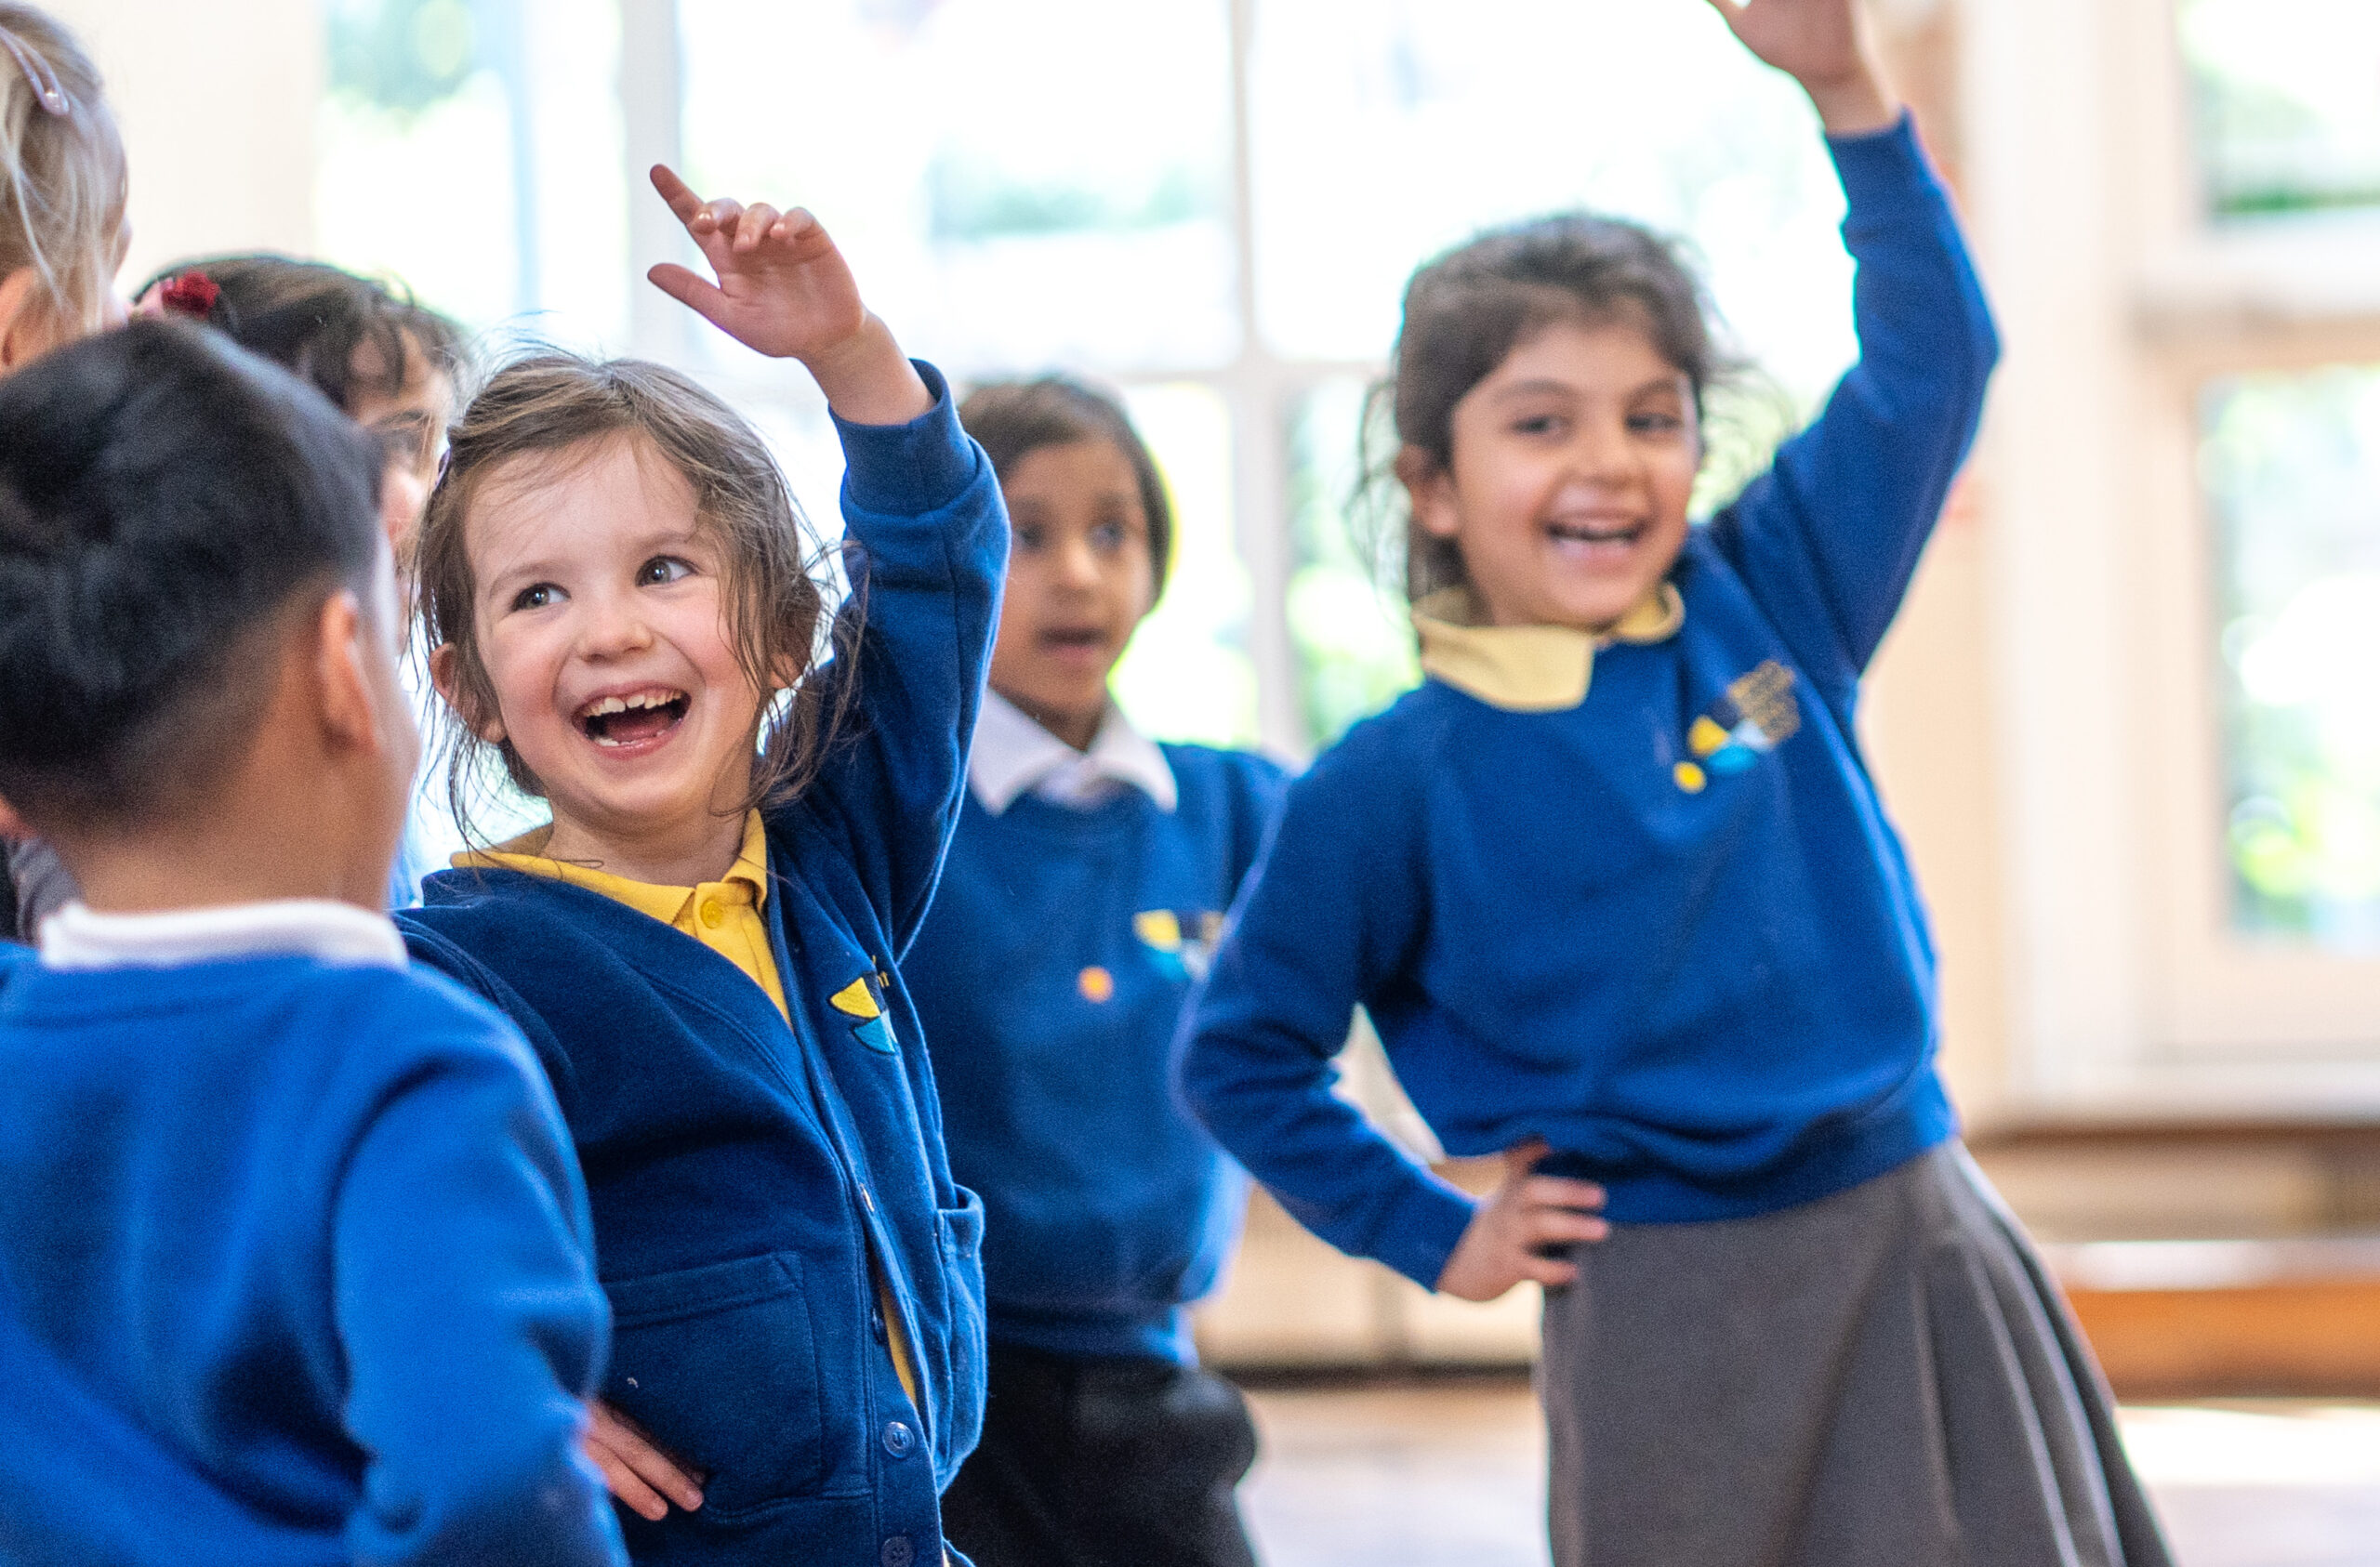 A group of children in blue school uniforms are enthusiastically participating in a classroom activity, with some raising their hands and smiling.